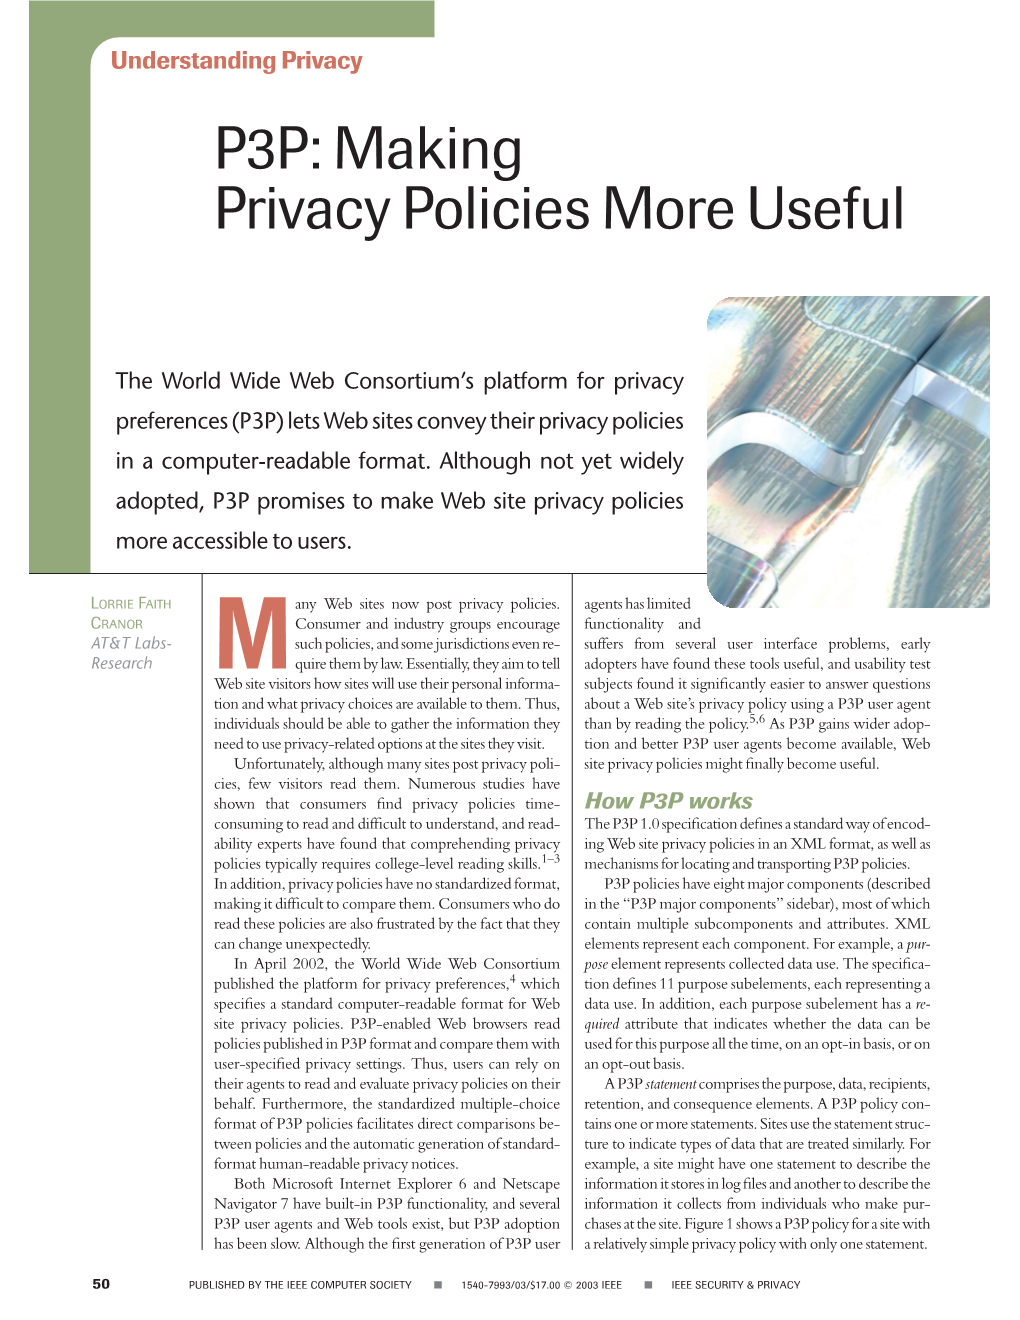 P3P: Making Privacy Policies More Useful